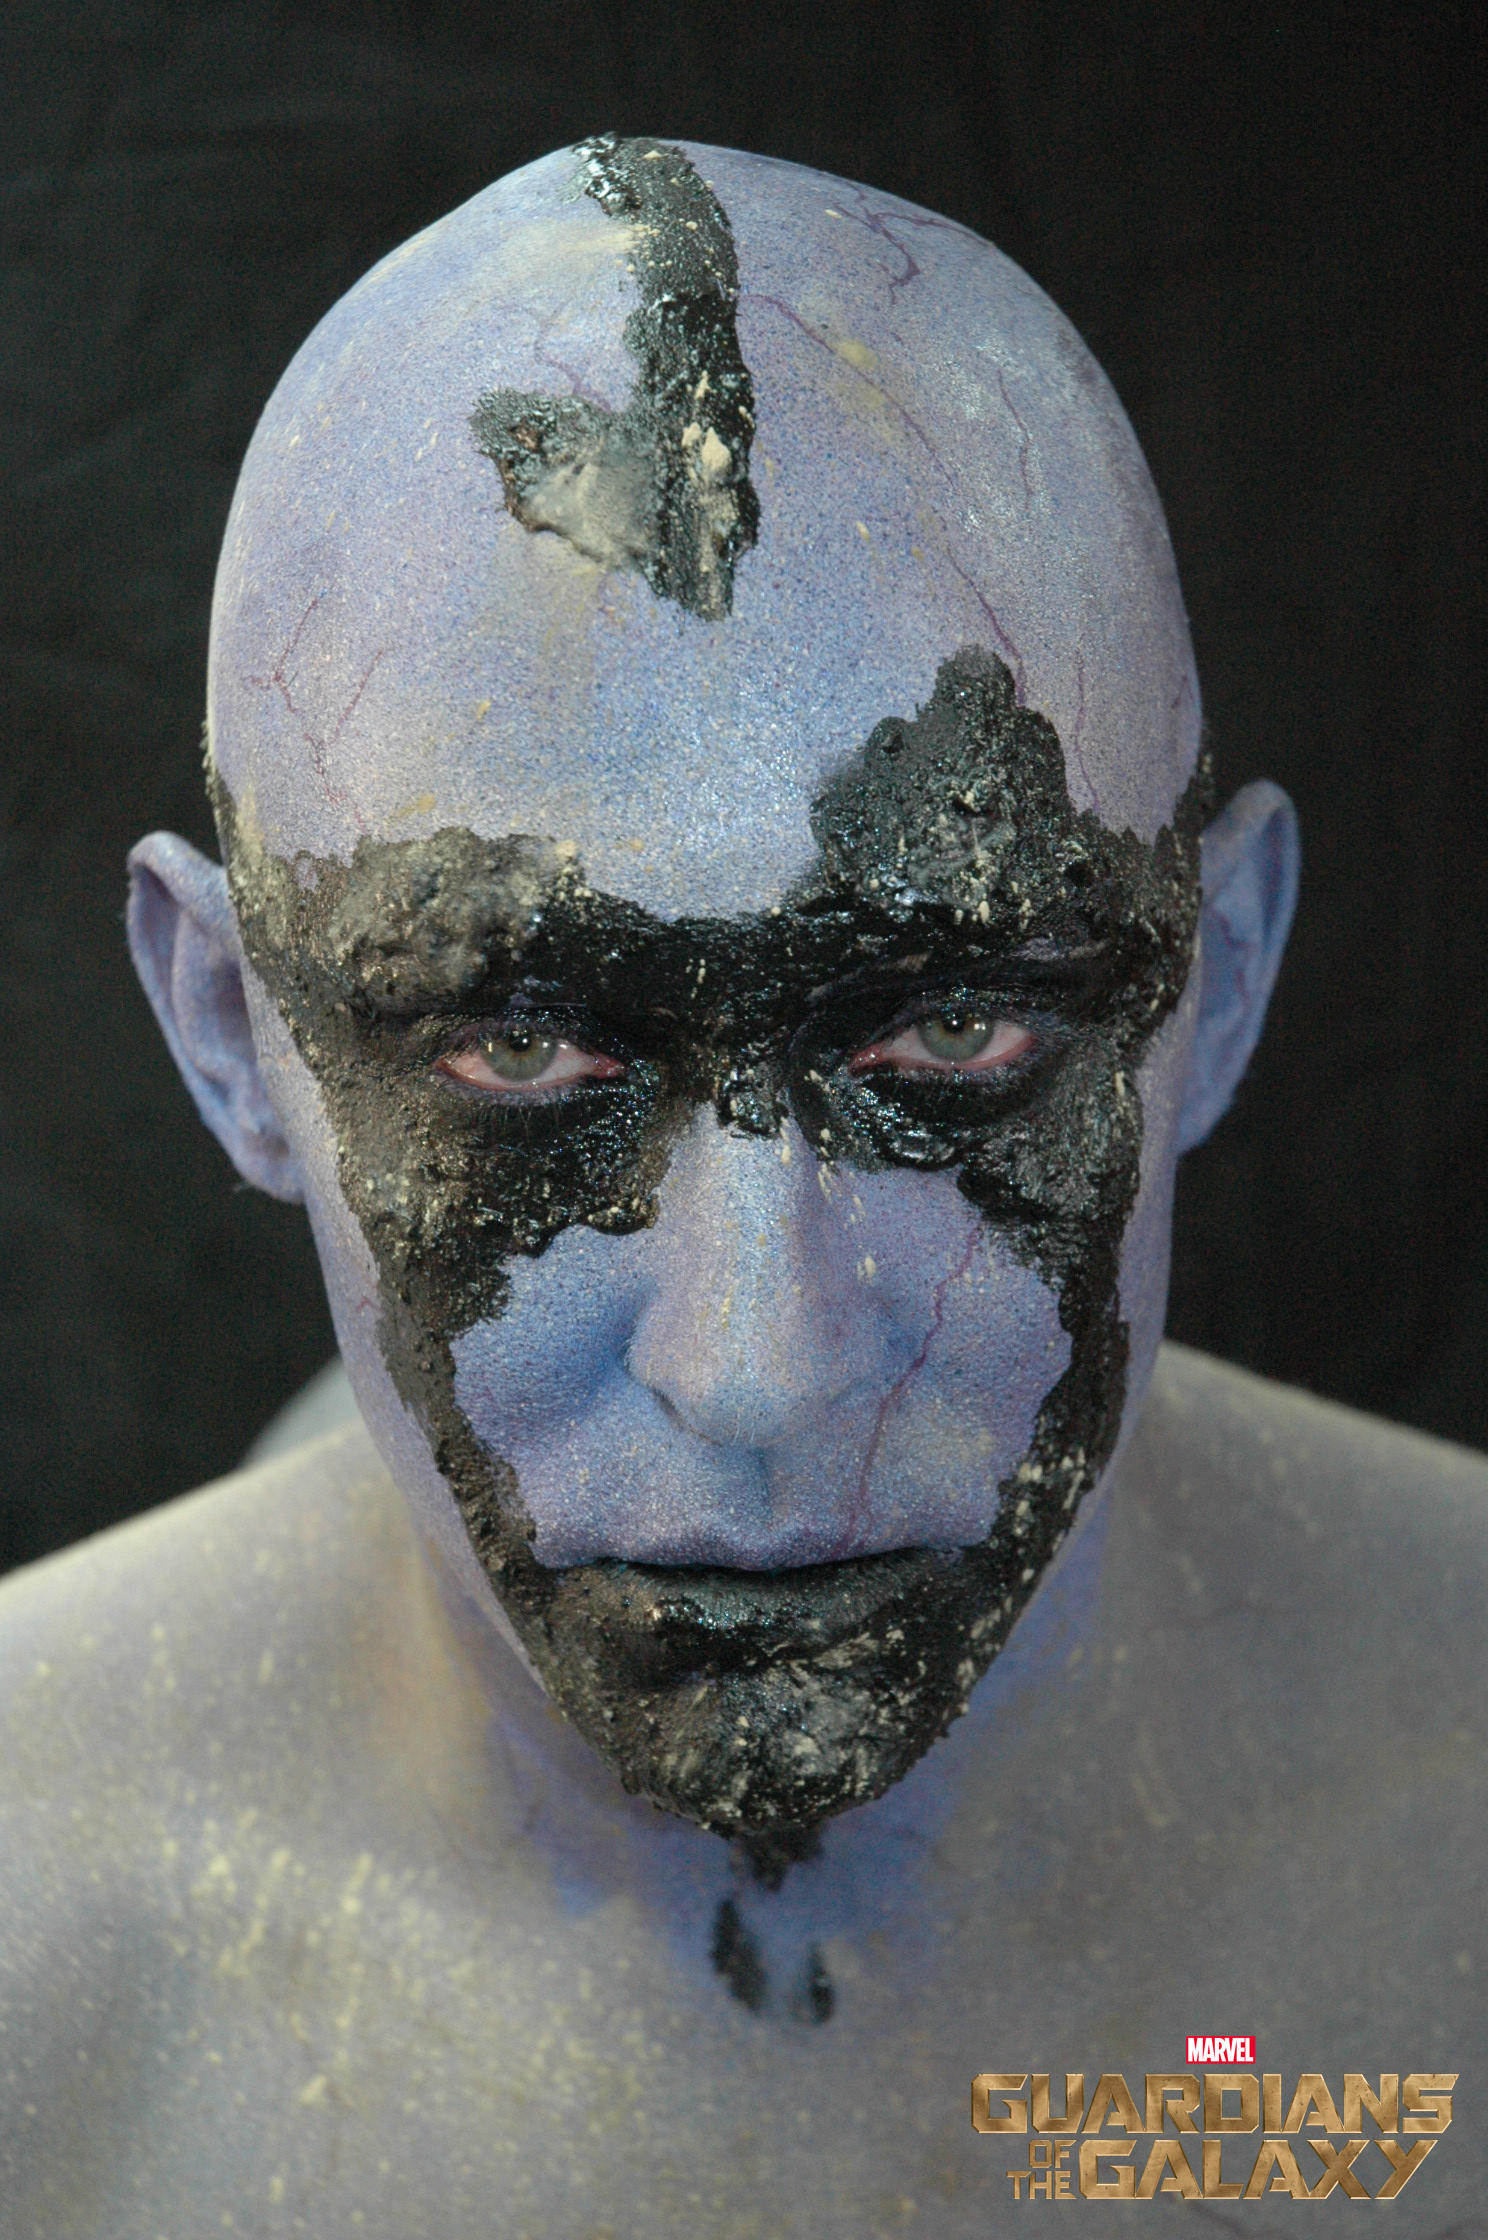 Lee Pace as Ronan in Stage 2 of his Make-up for Guardians of the Galaxy